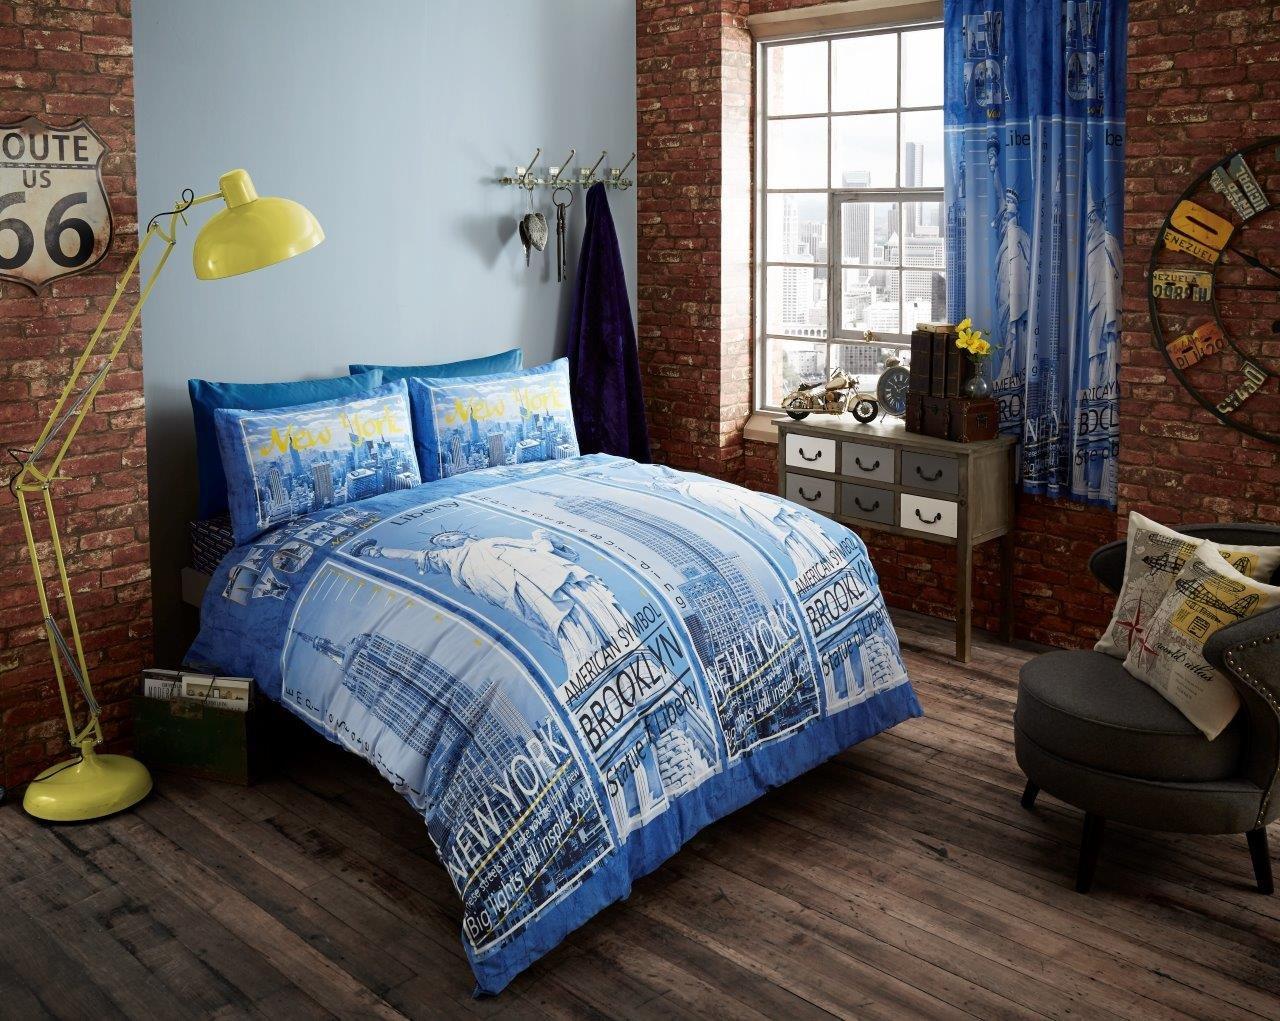 Printed Polycotton Duvet Cover With Pillowcases - Blue